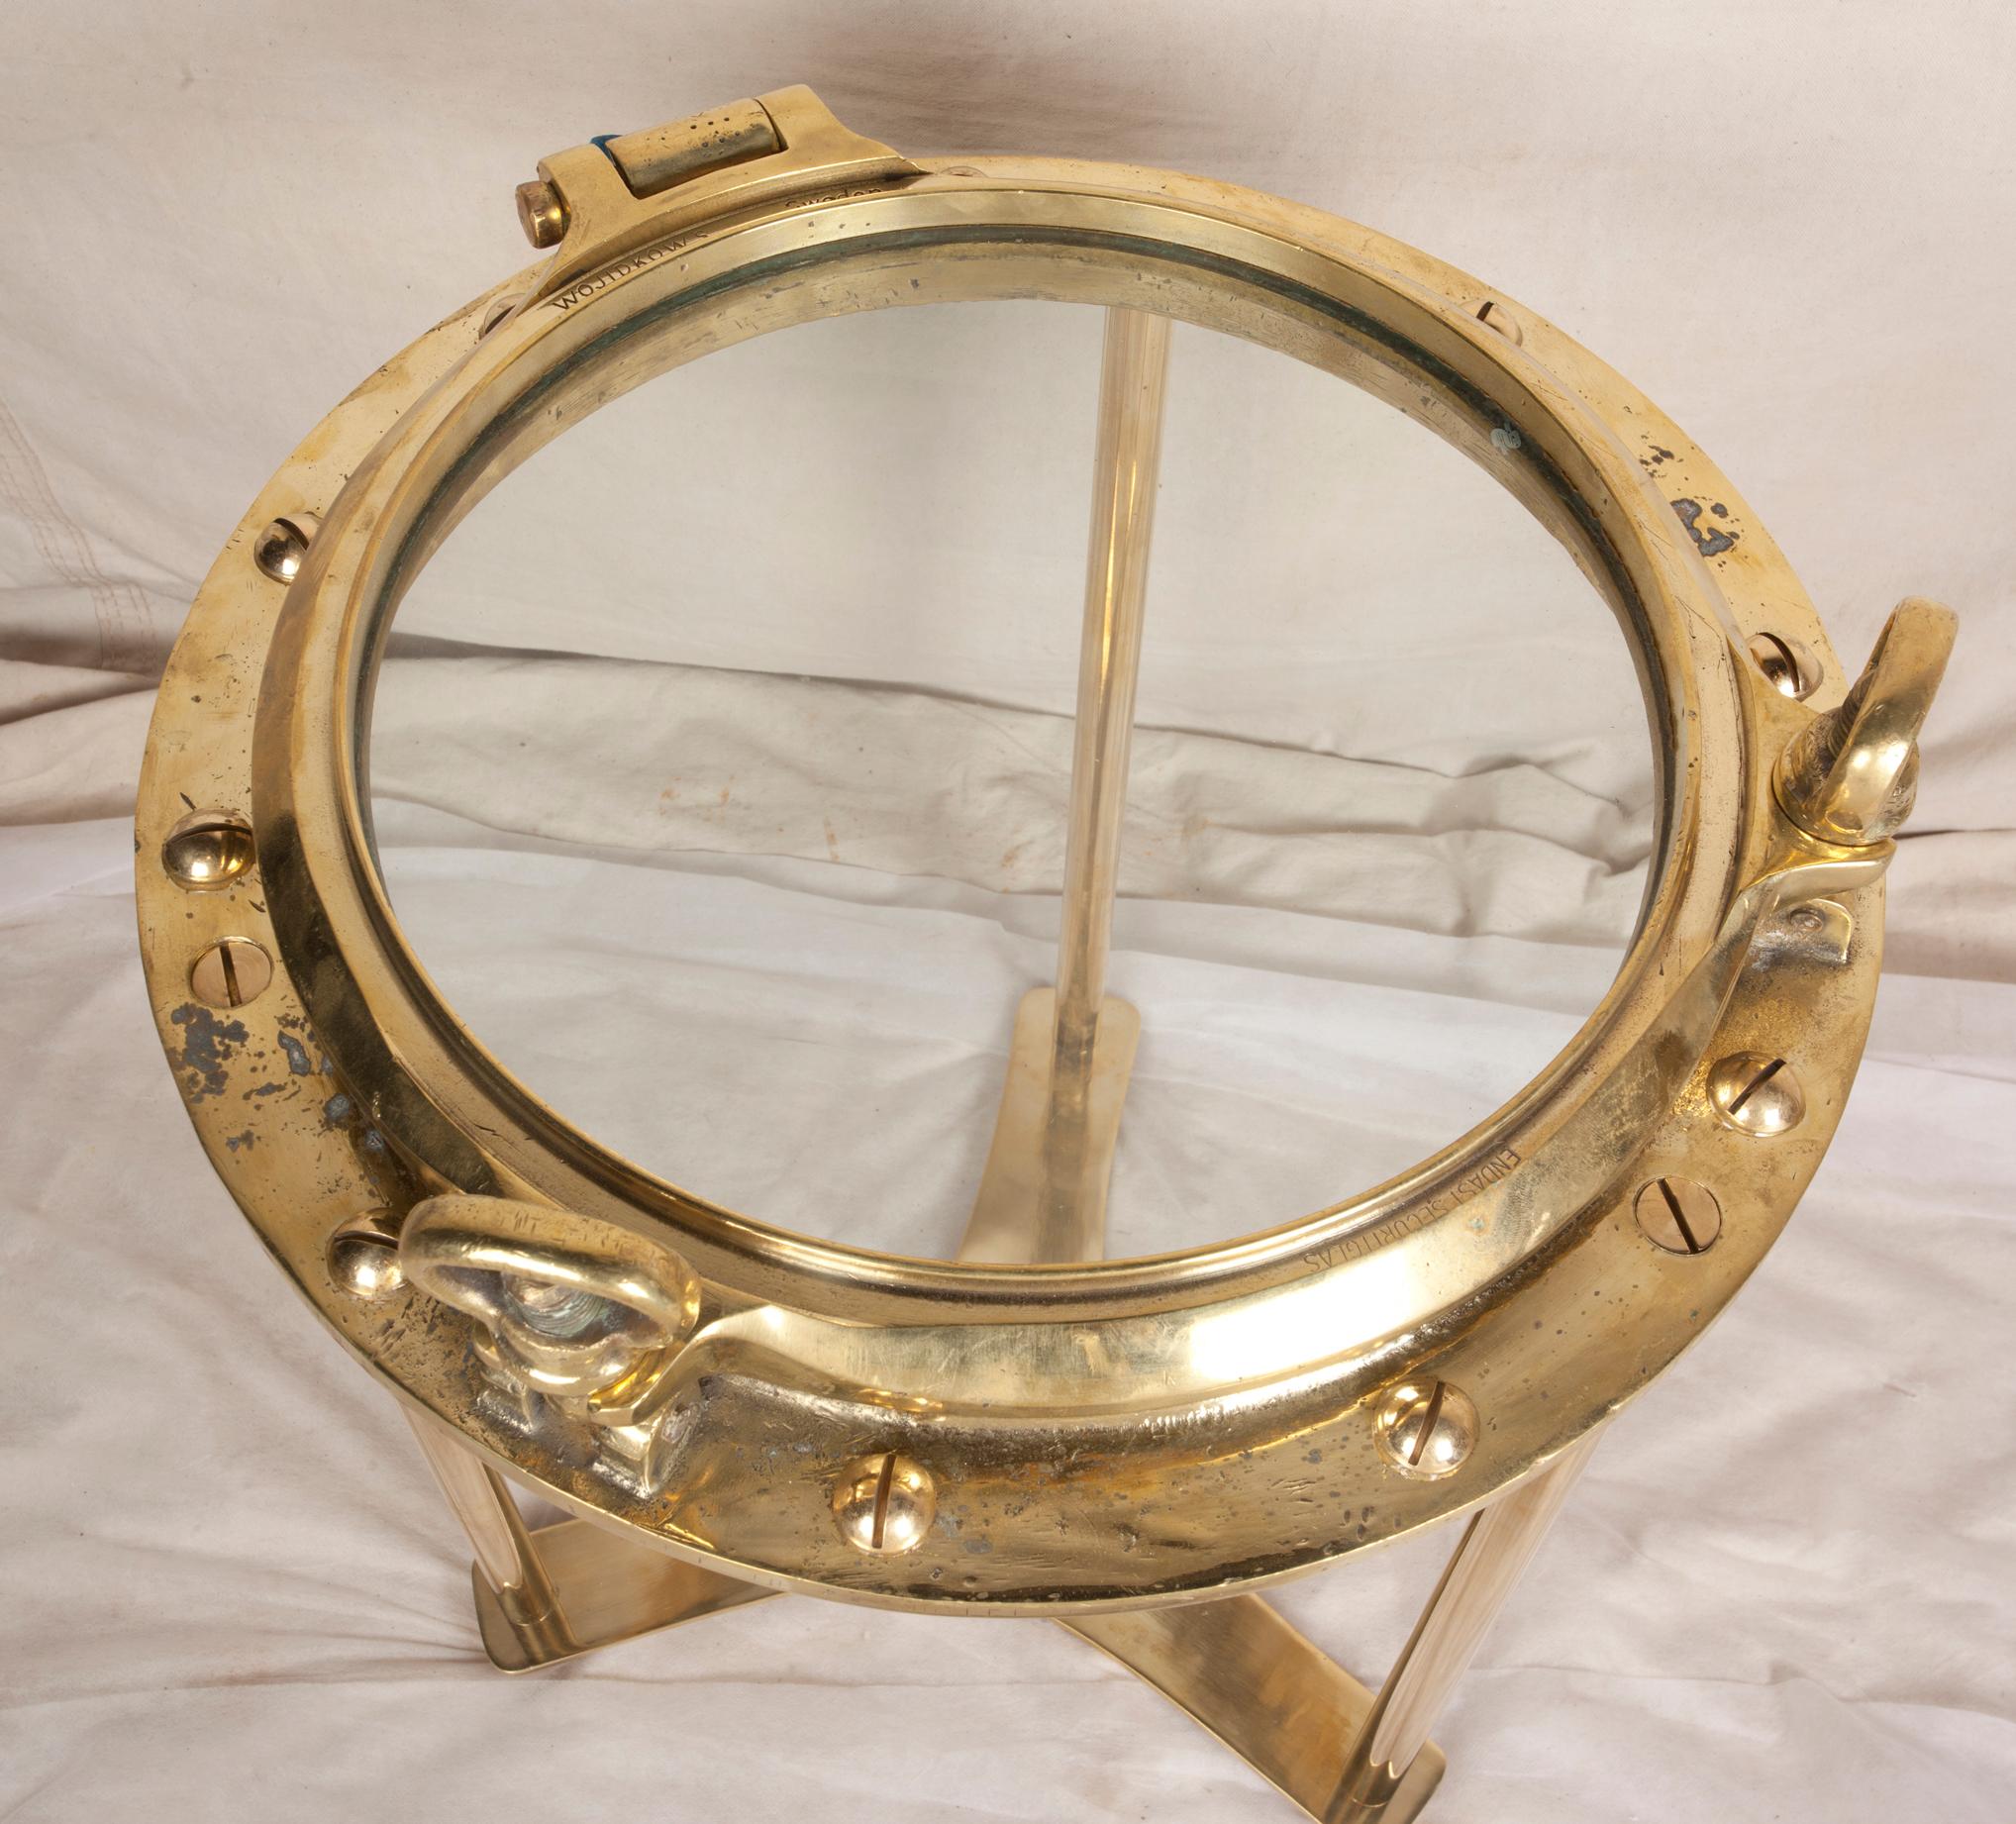 Solid brass working nautical porthole window from a decommissioned ship with great patina. This has been polished, the rivets put back in and the table base designed by Deborah Lockhart Phillips is able to disassemble if needed. Use as a side or